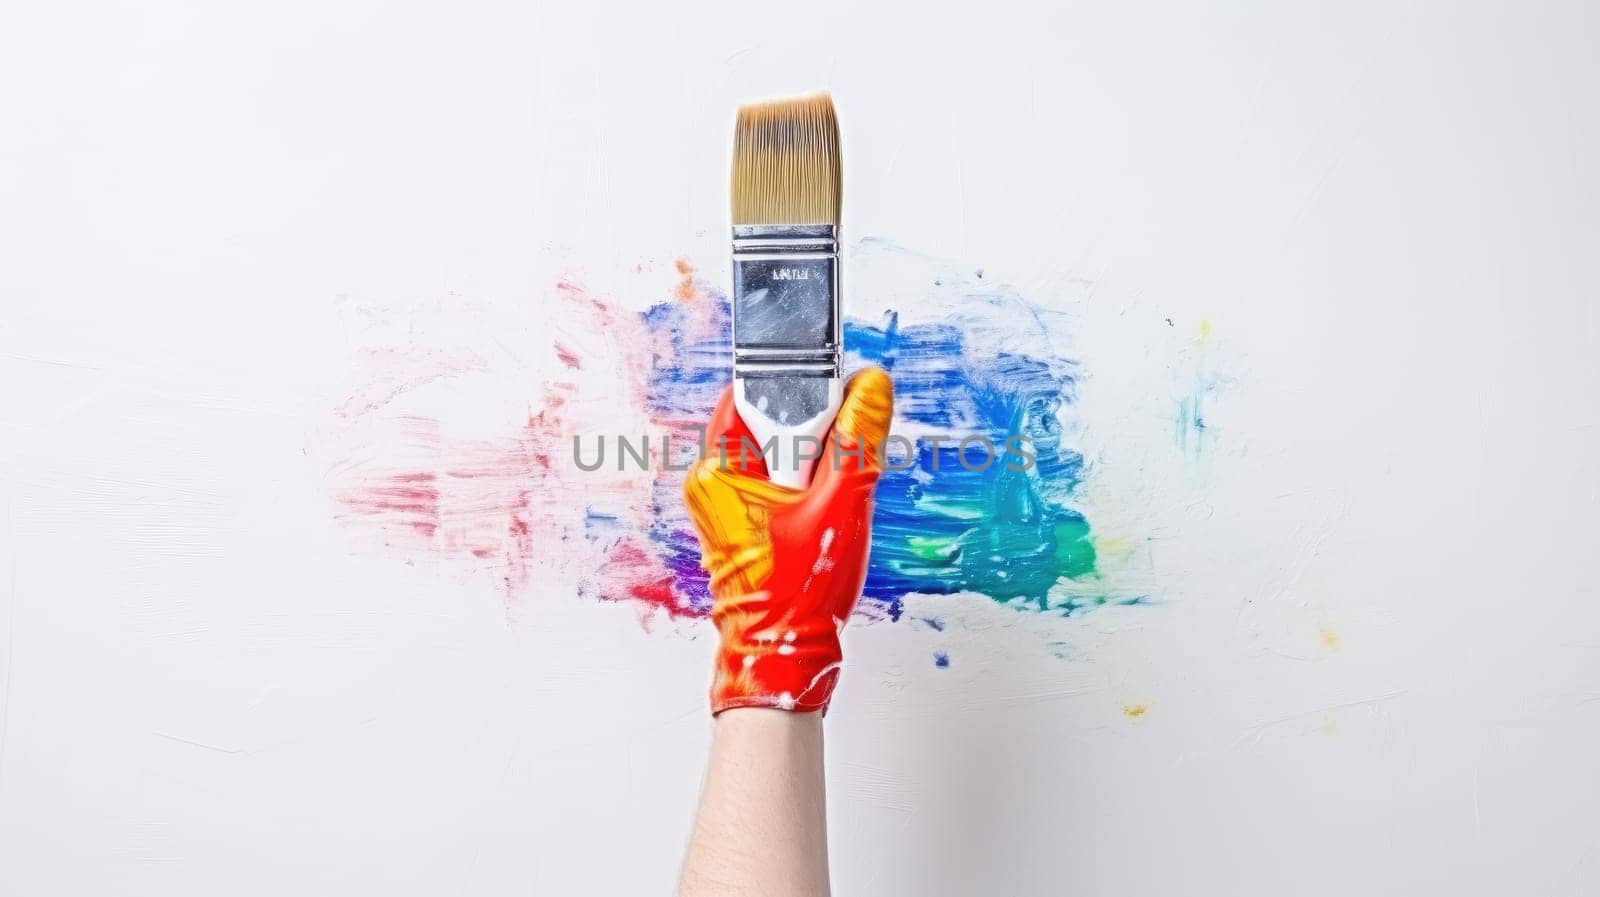 Colorful Renovation Project. Hand Holding Paint Brush with Rainbow Paint Splash - DIY Home Improvement on White Background